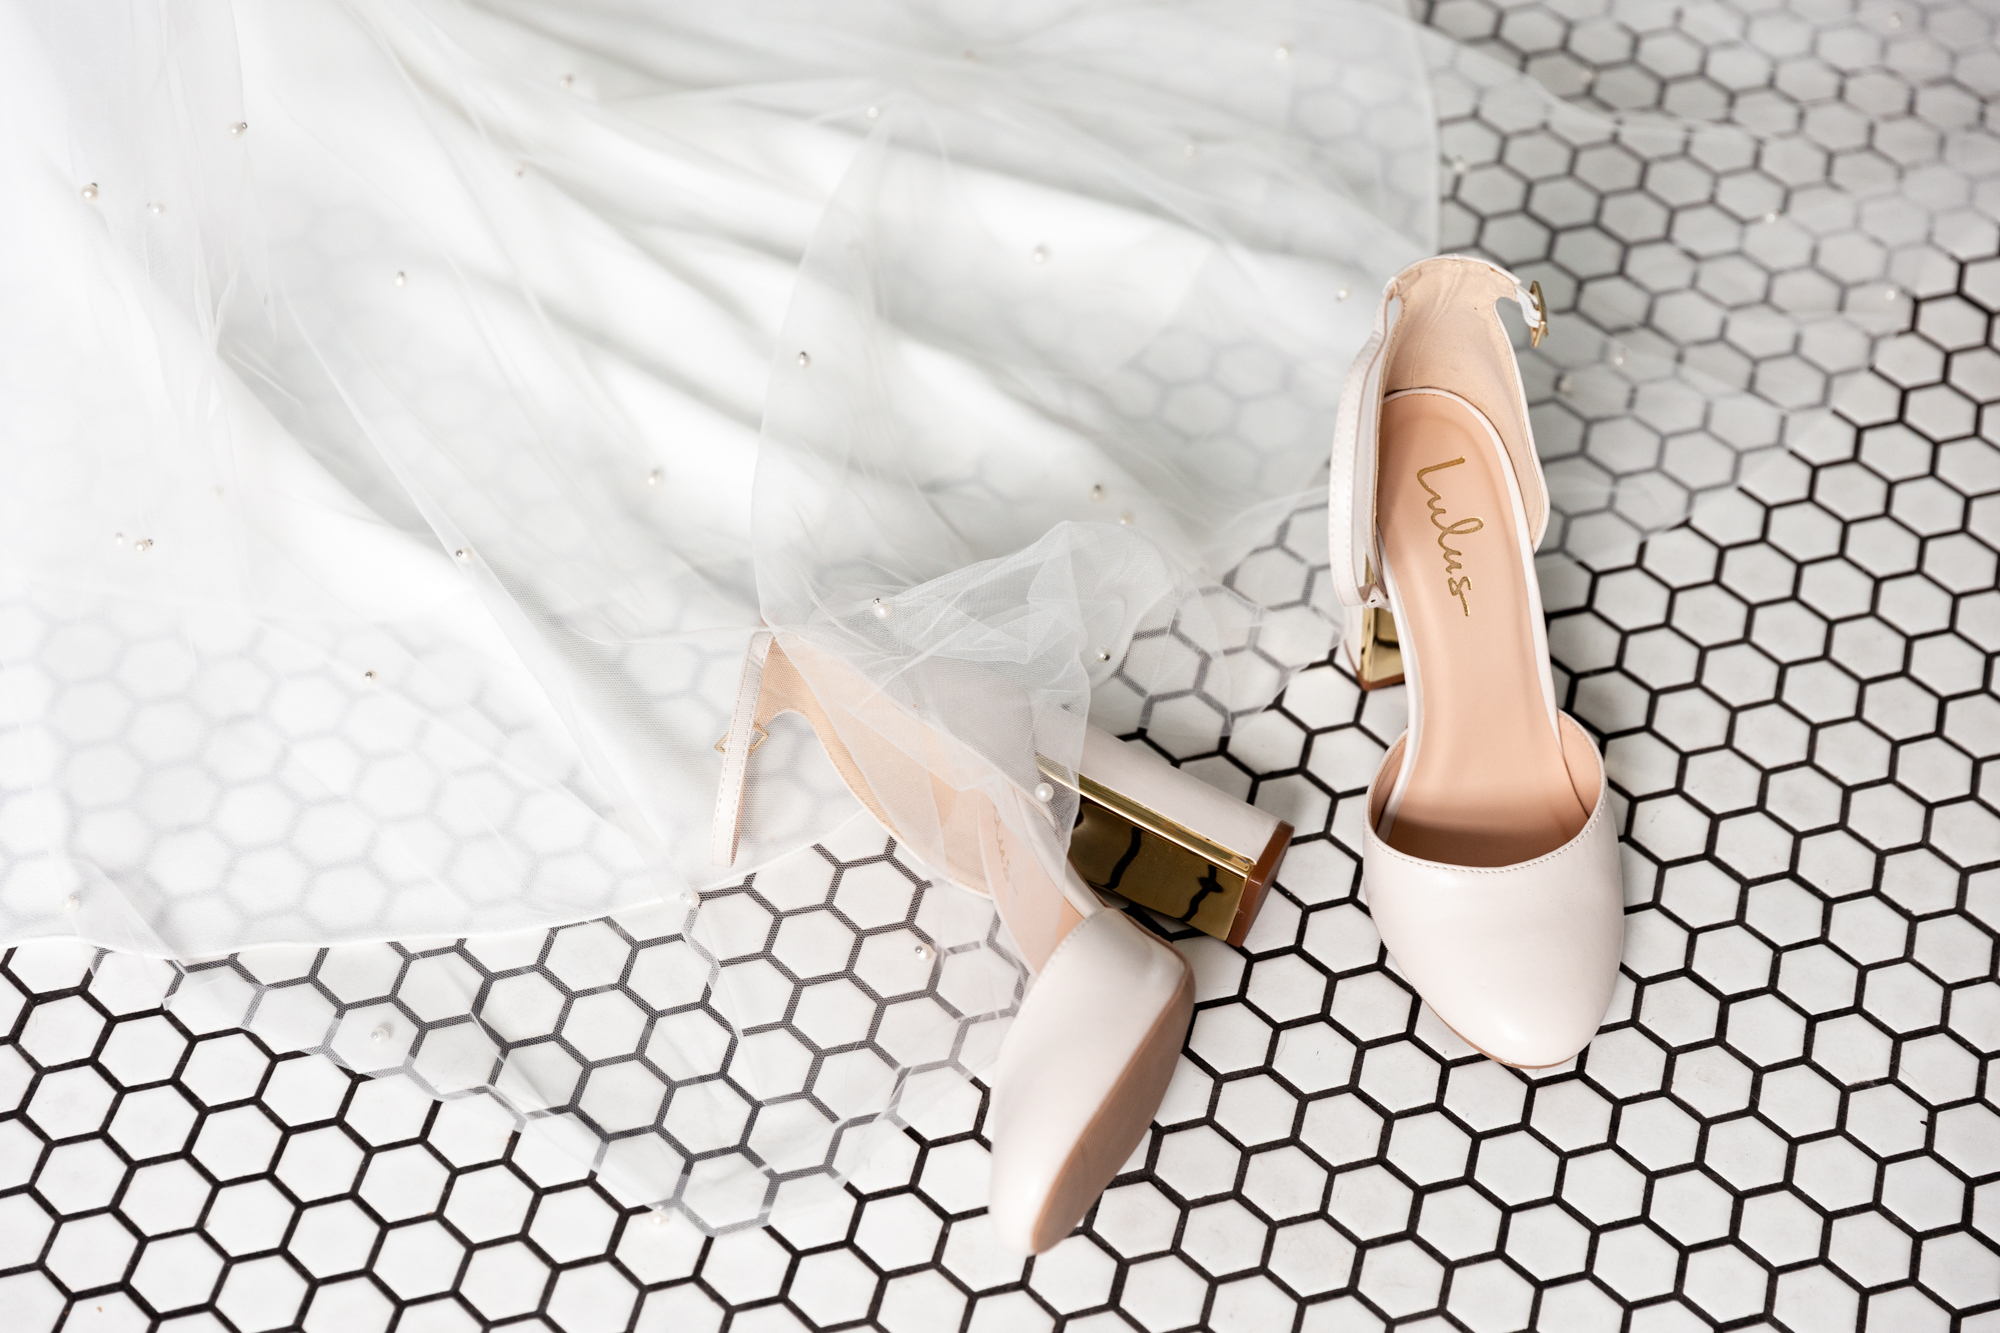 Nude wedding shoes and wedding dress train against black and white penny tile floor